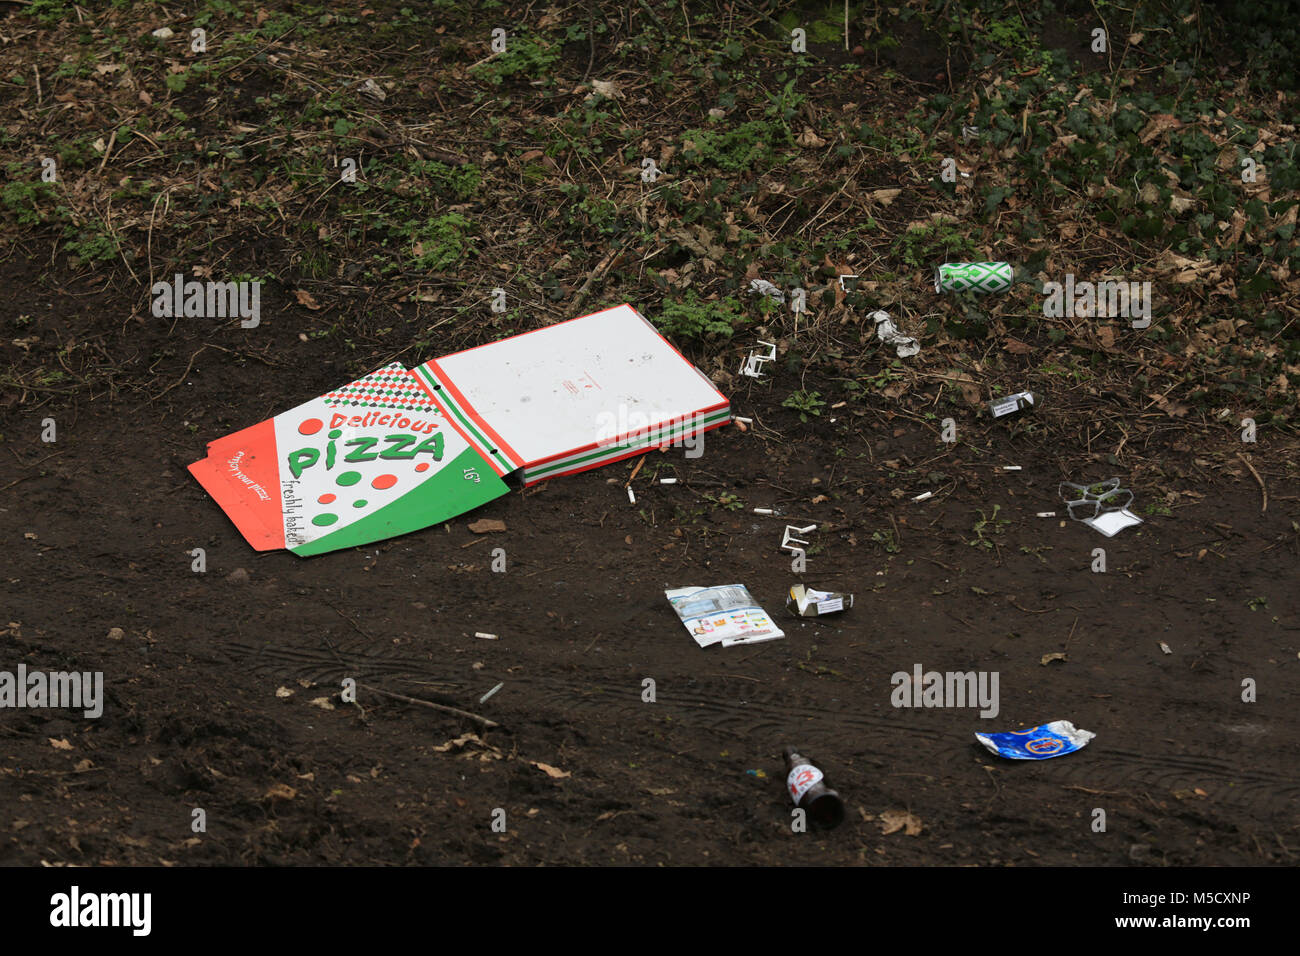 Pizza box and assorted cans and bottles thrown from a car in the countryside near Stourbridge, West midlands, uk. Stock Photo